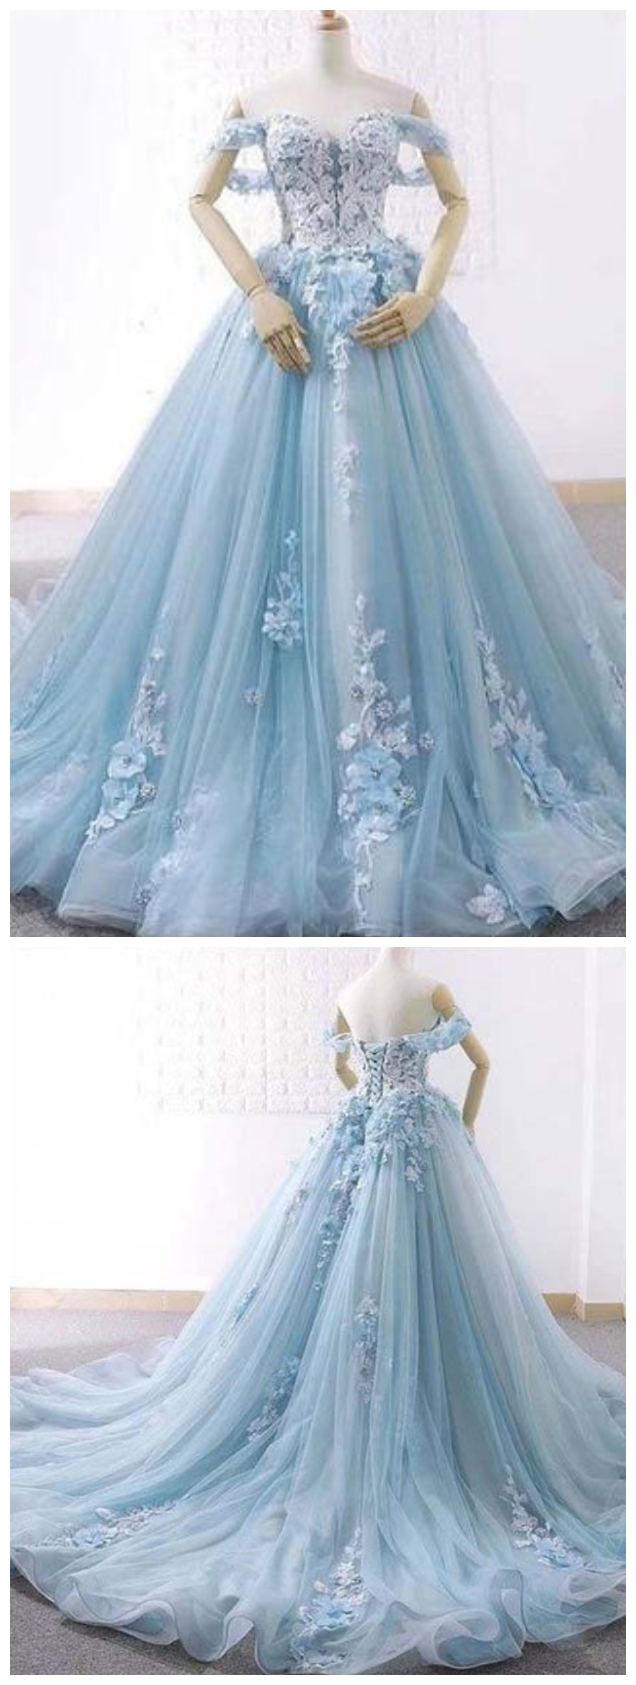 Ball Gown Delicate Florals Prom Gown Long Tulle Prom Dress With Chapel Train